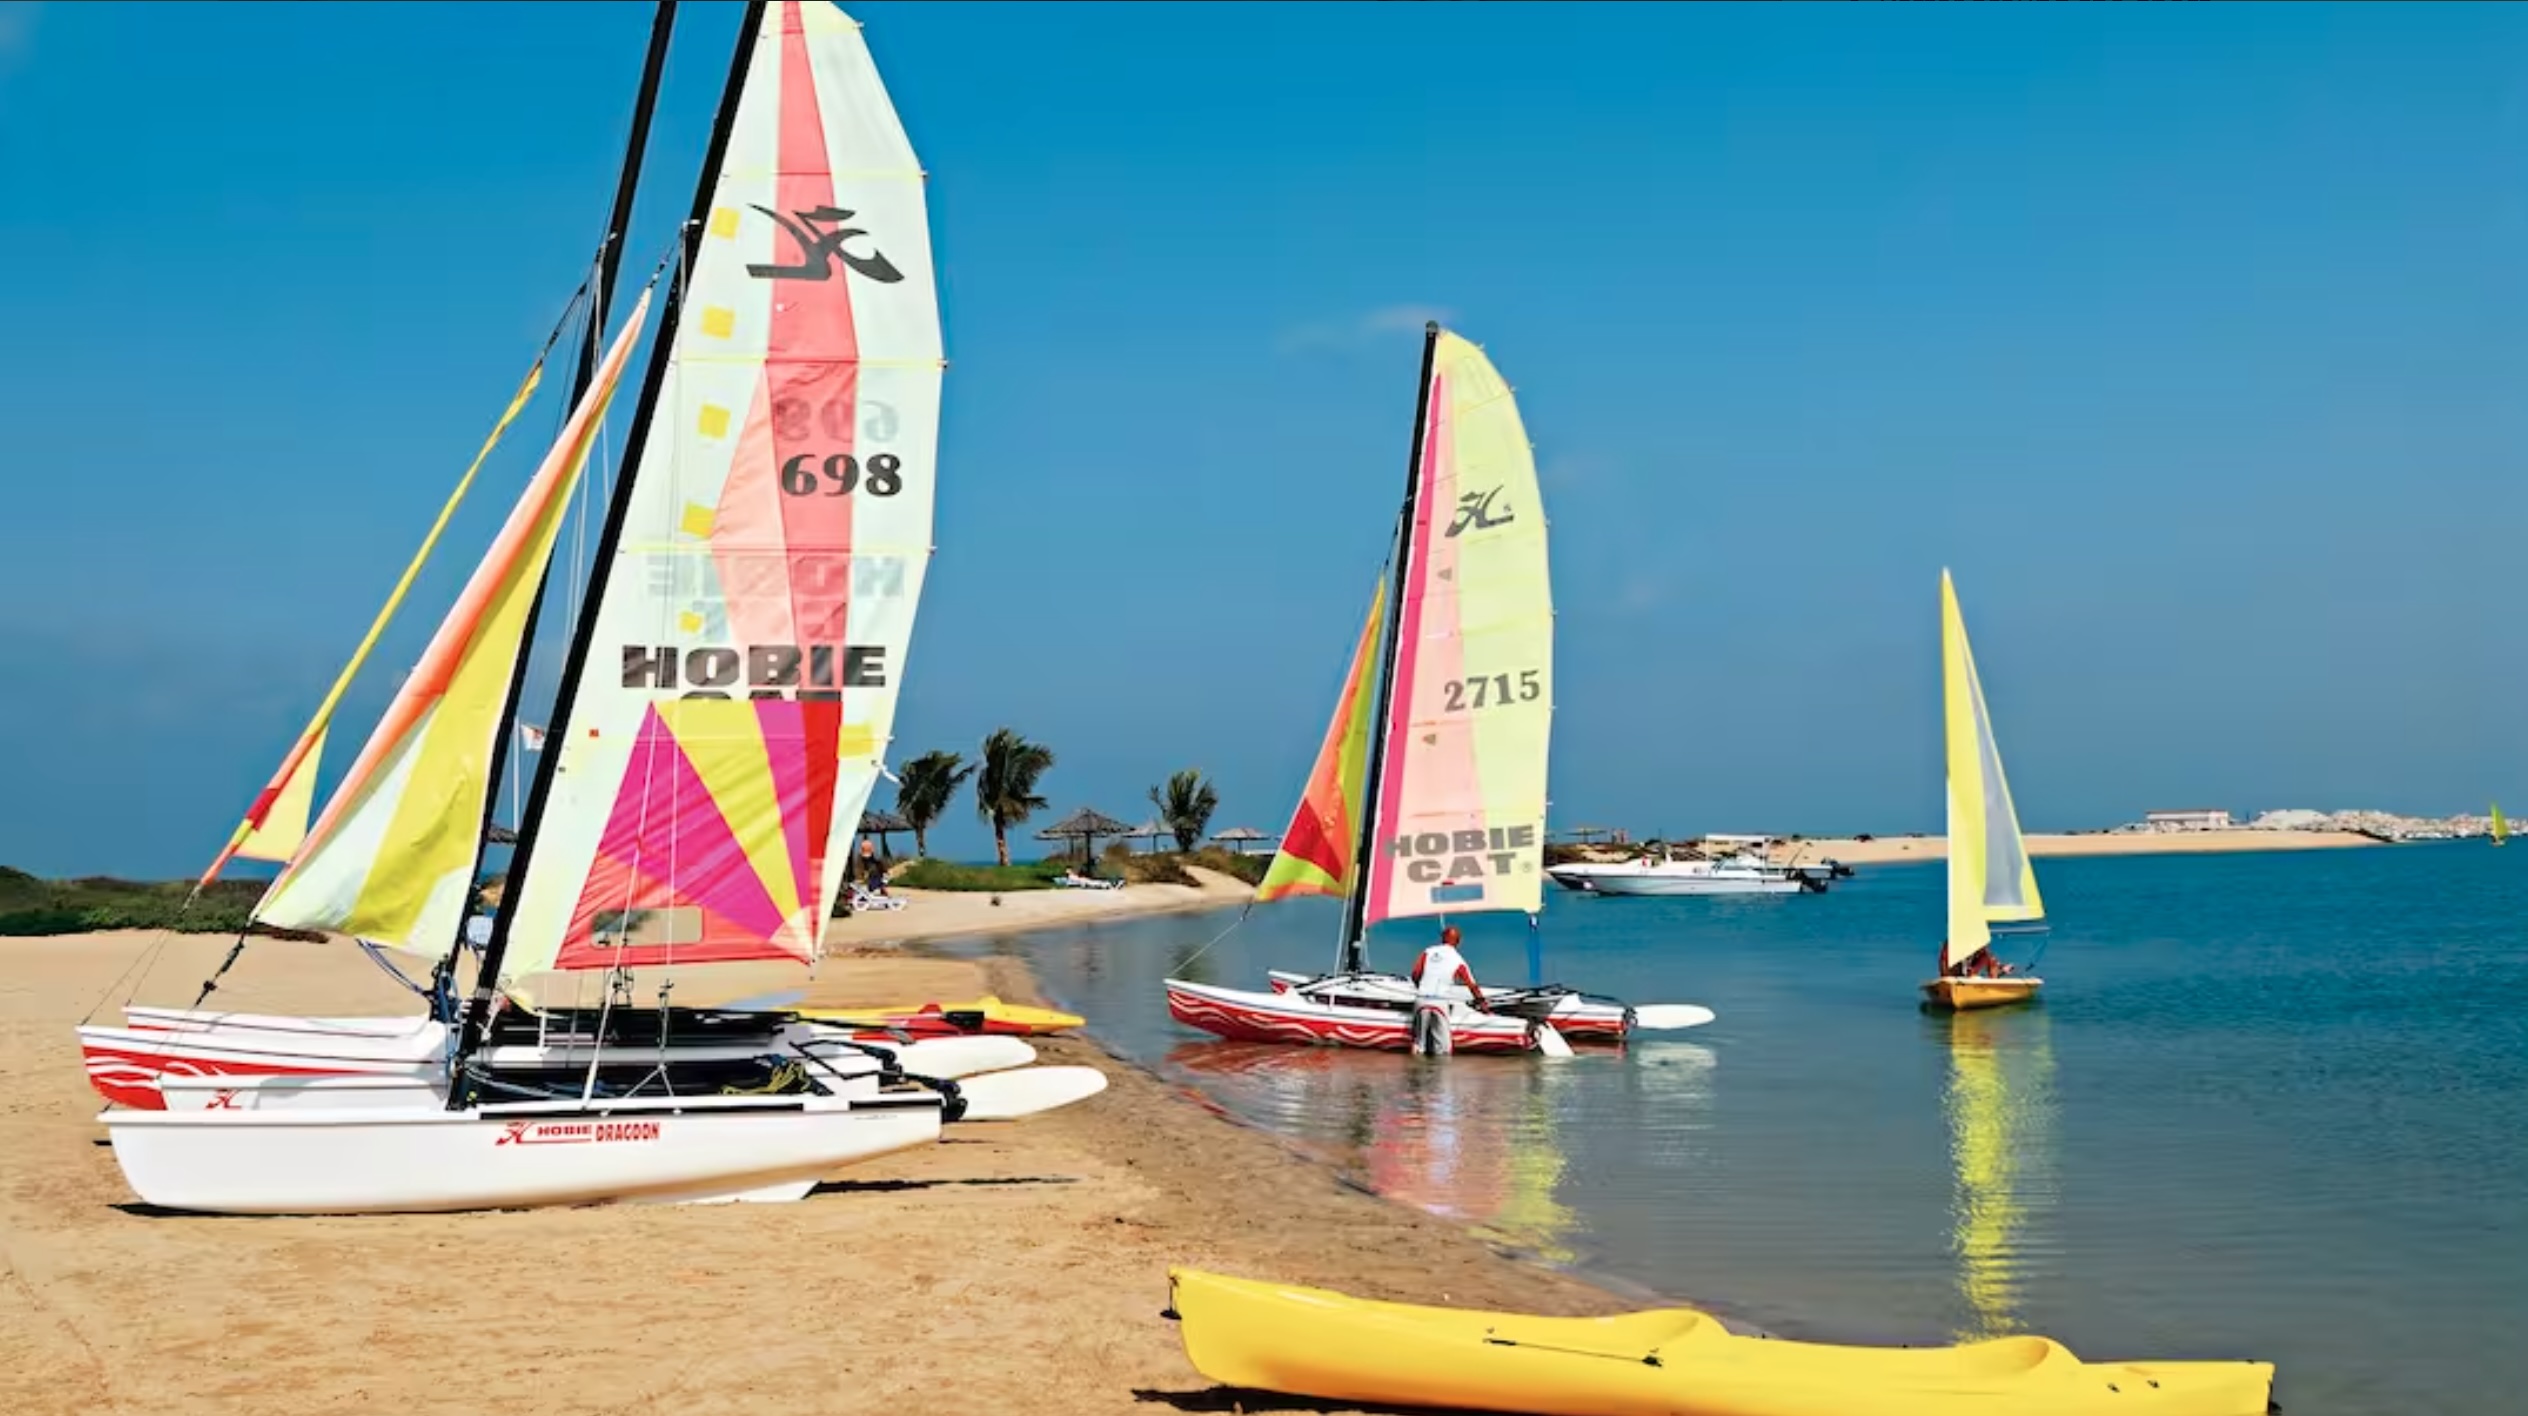 Enjoy watersports in one of the UAE's less-known destinations. Enjoy it while its quiet